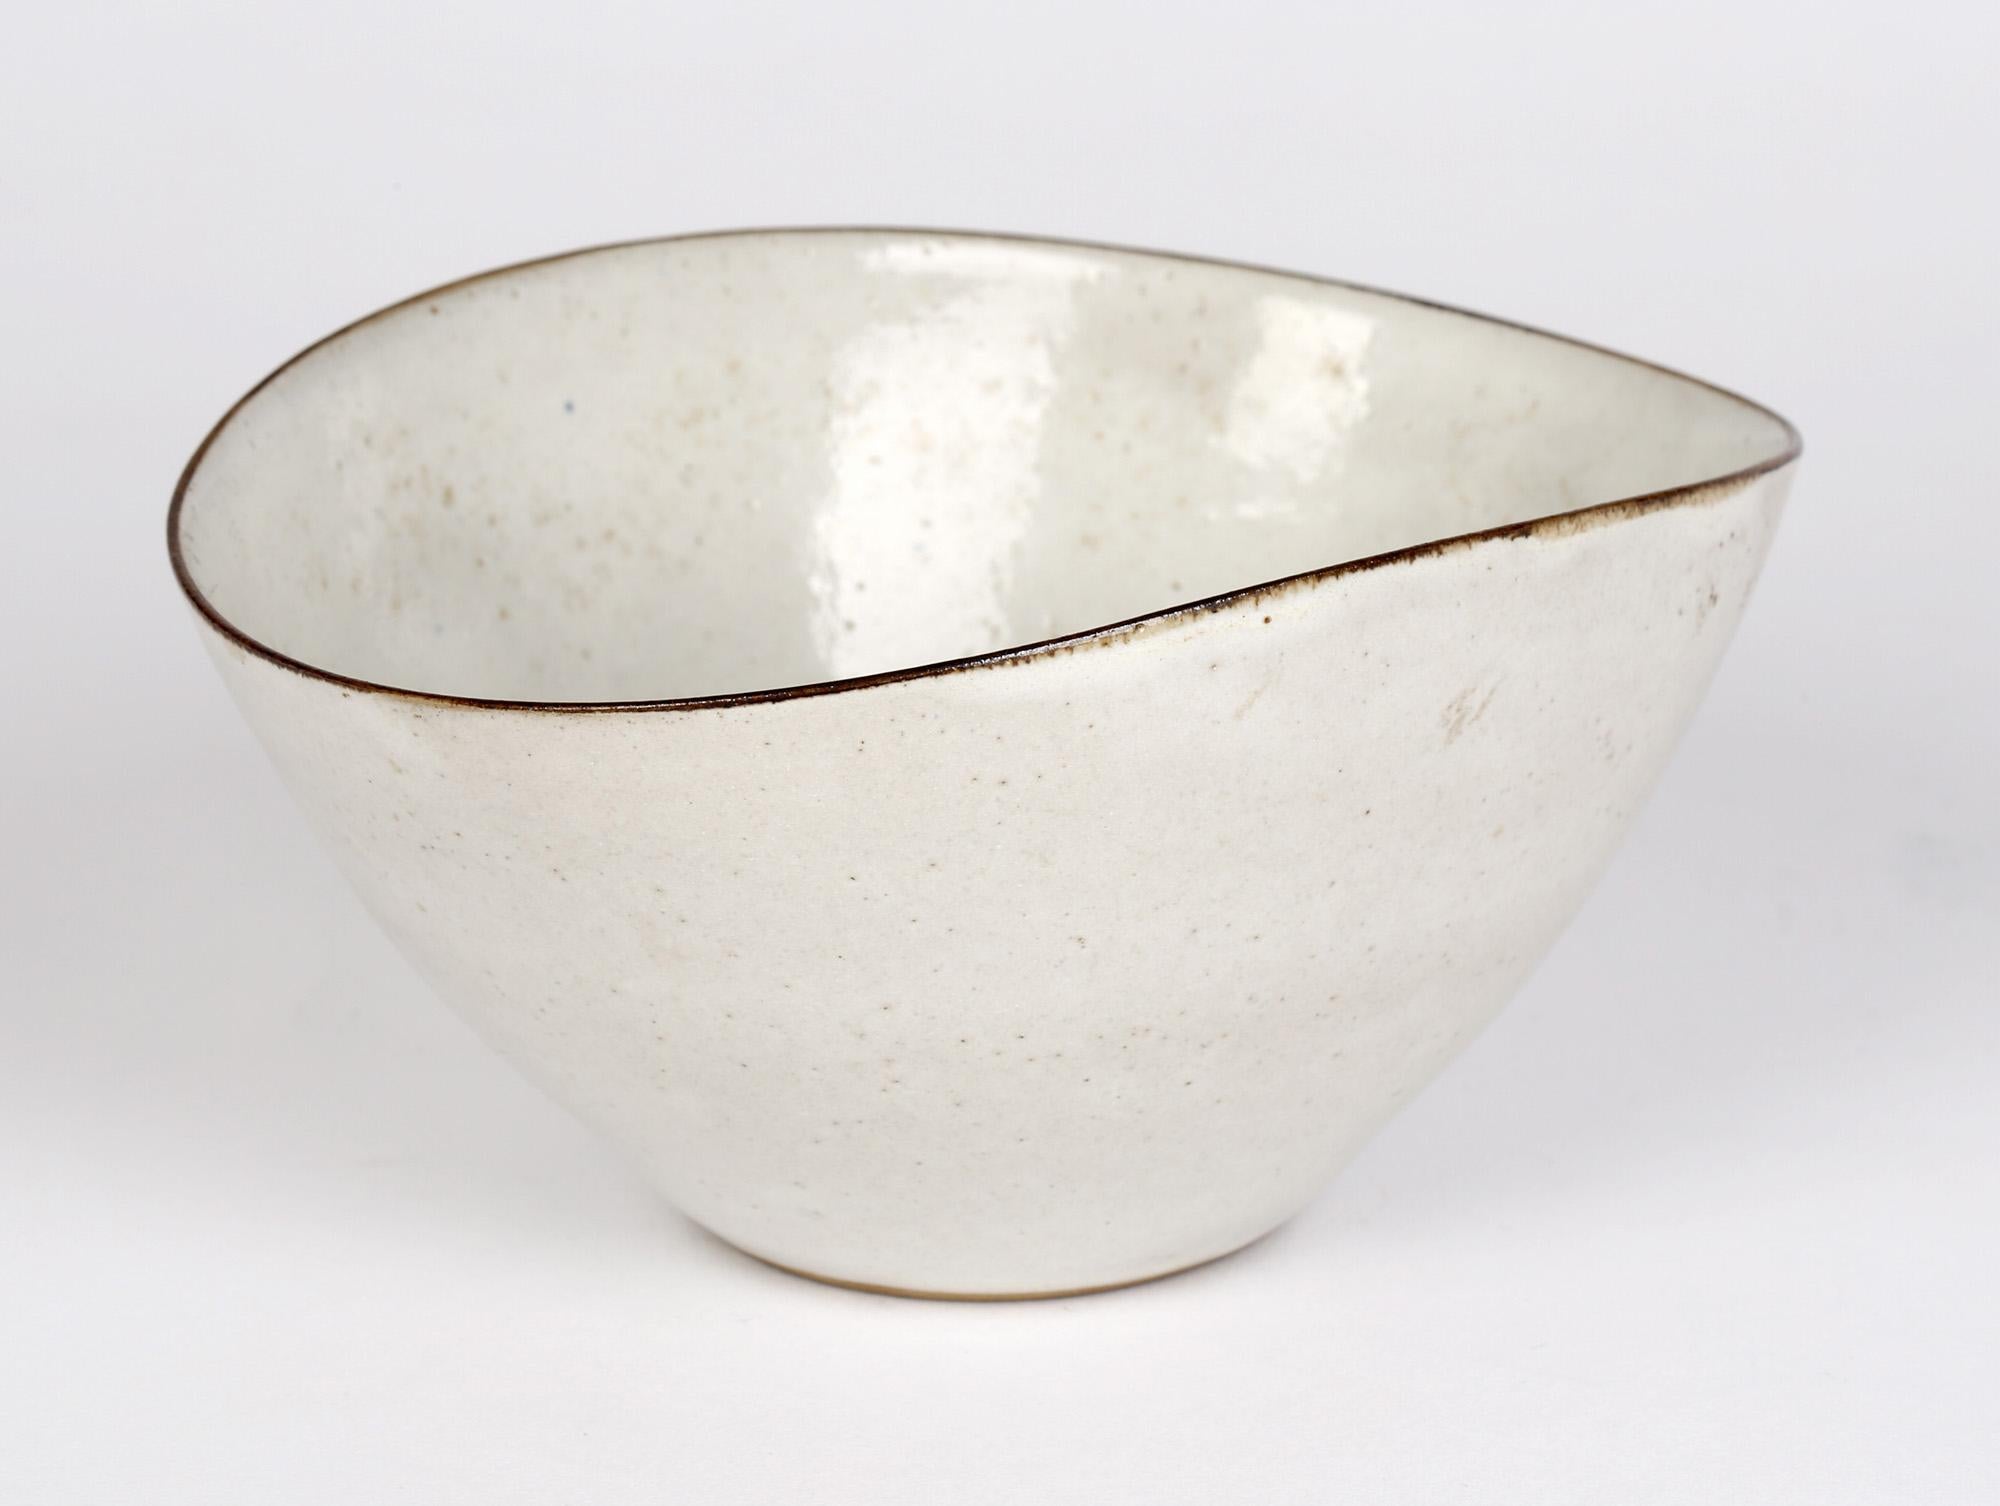 English Lucie Rie 'Austrian/British, 1902-1995' Squeezed Oatmeal Glazed Pottery Bowl For Sale